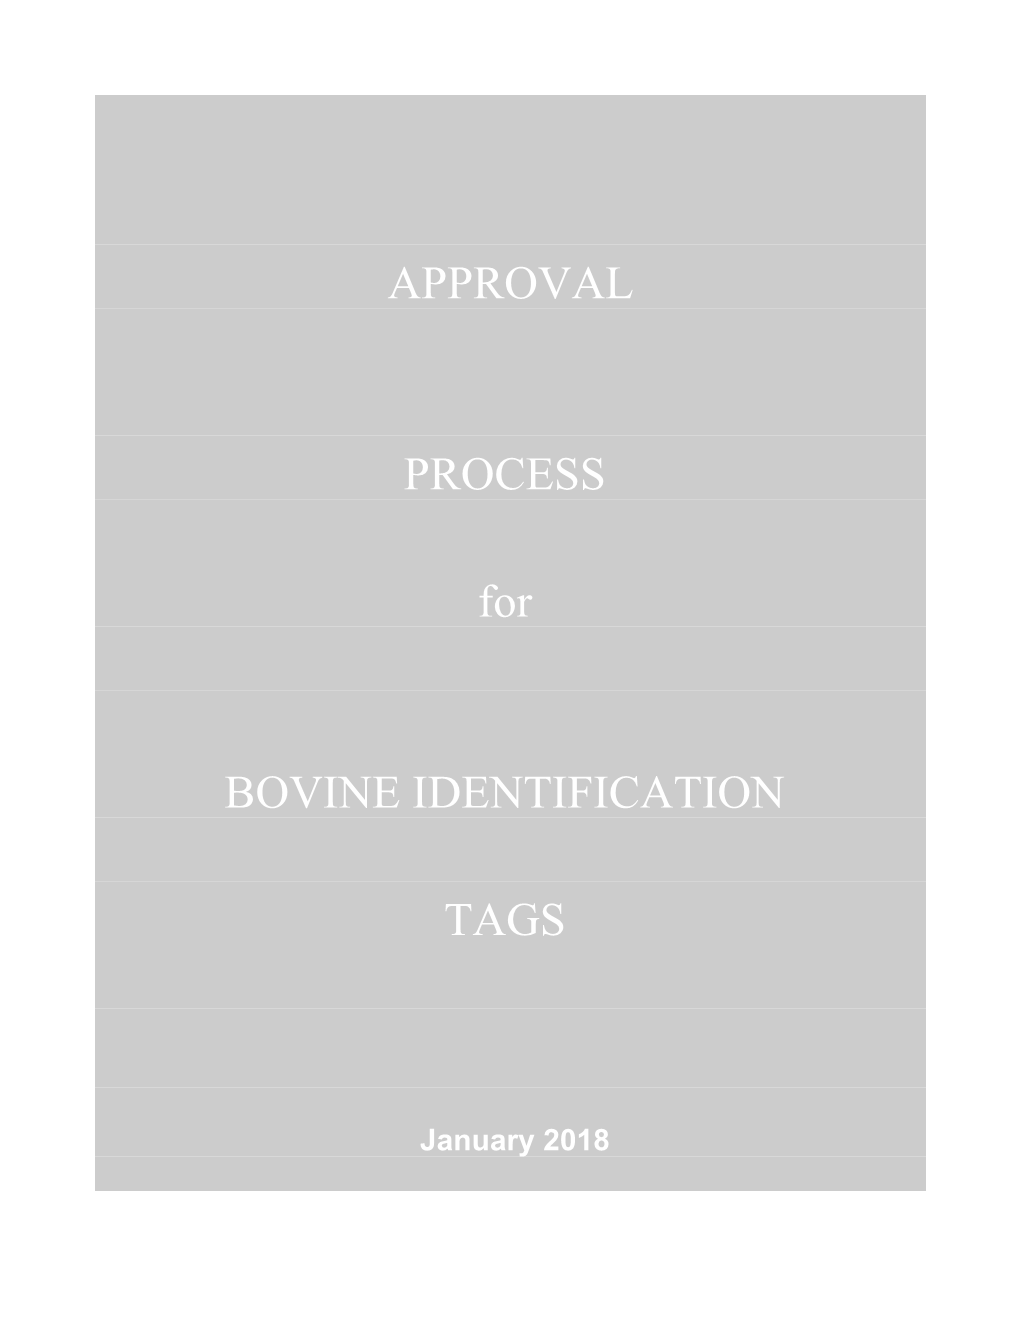 Approval Process for Bovine Identification Tags